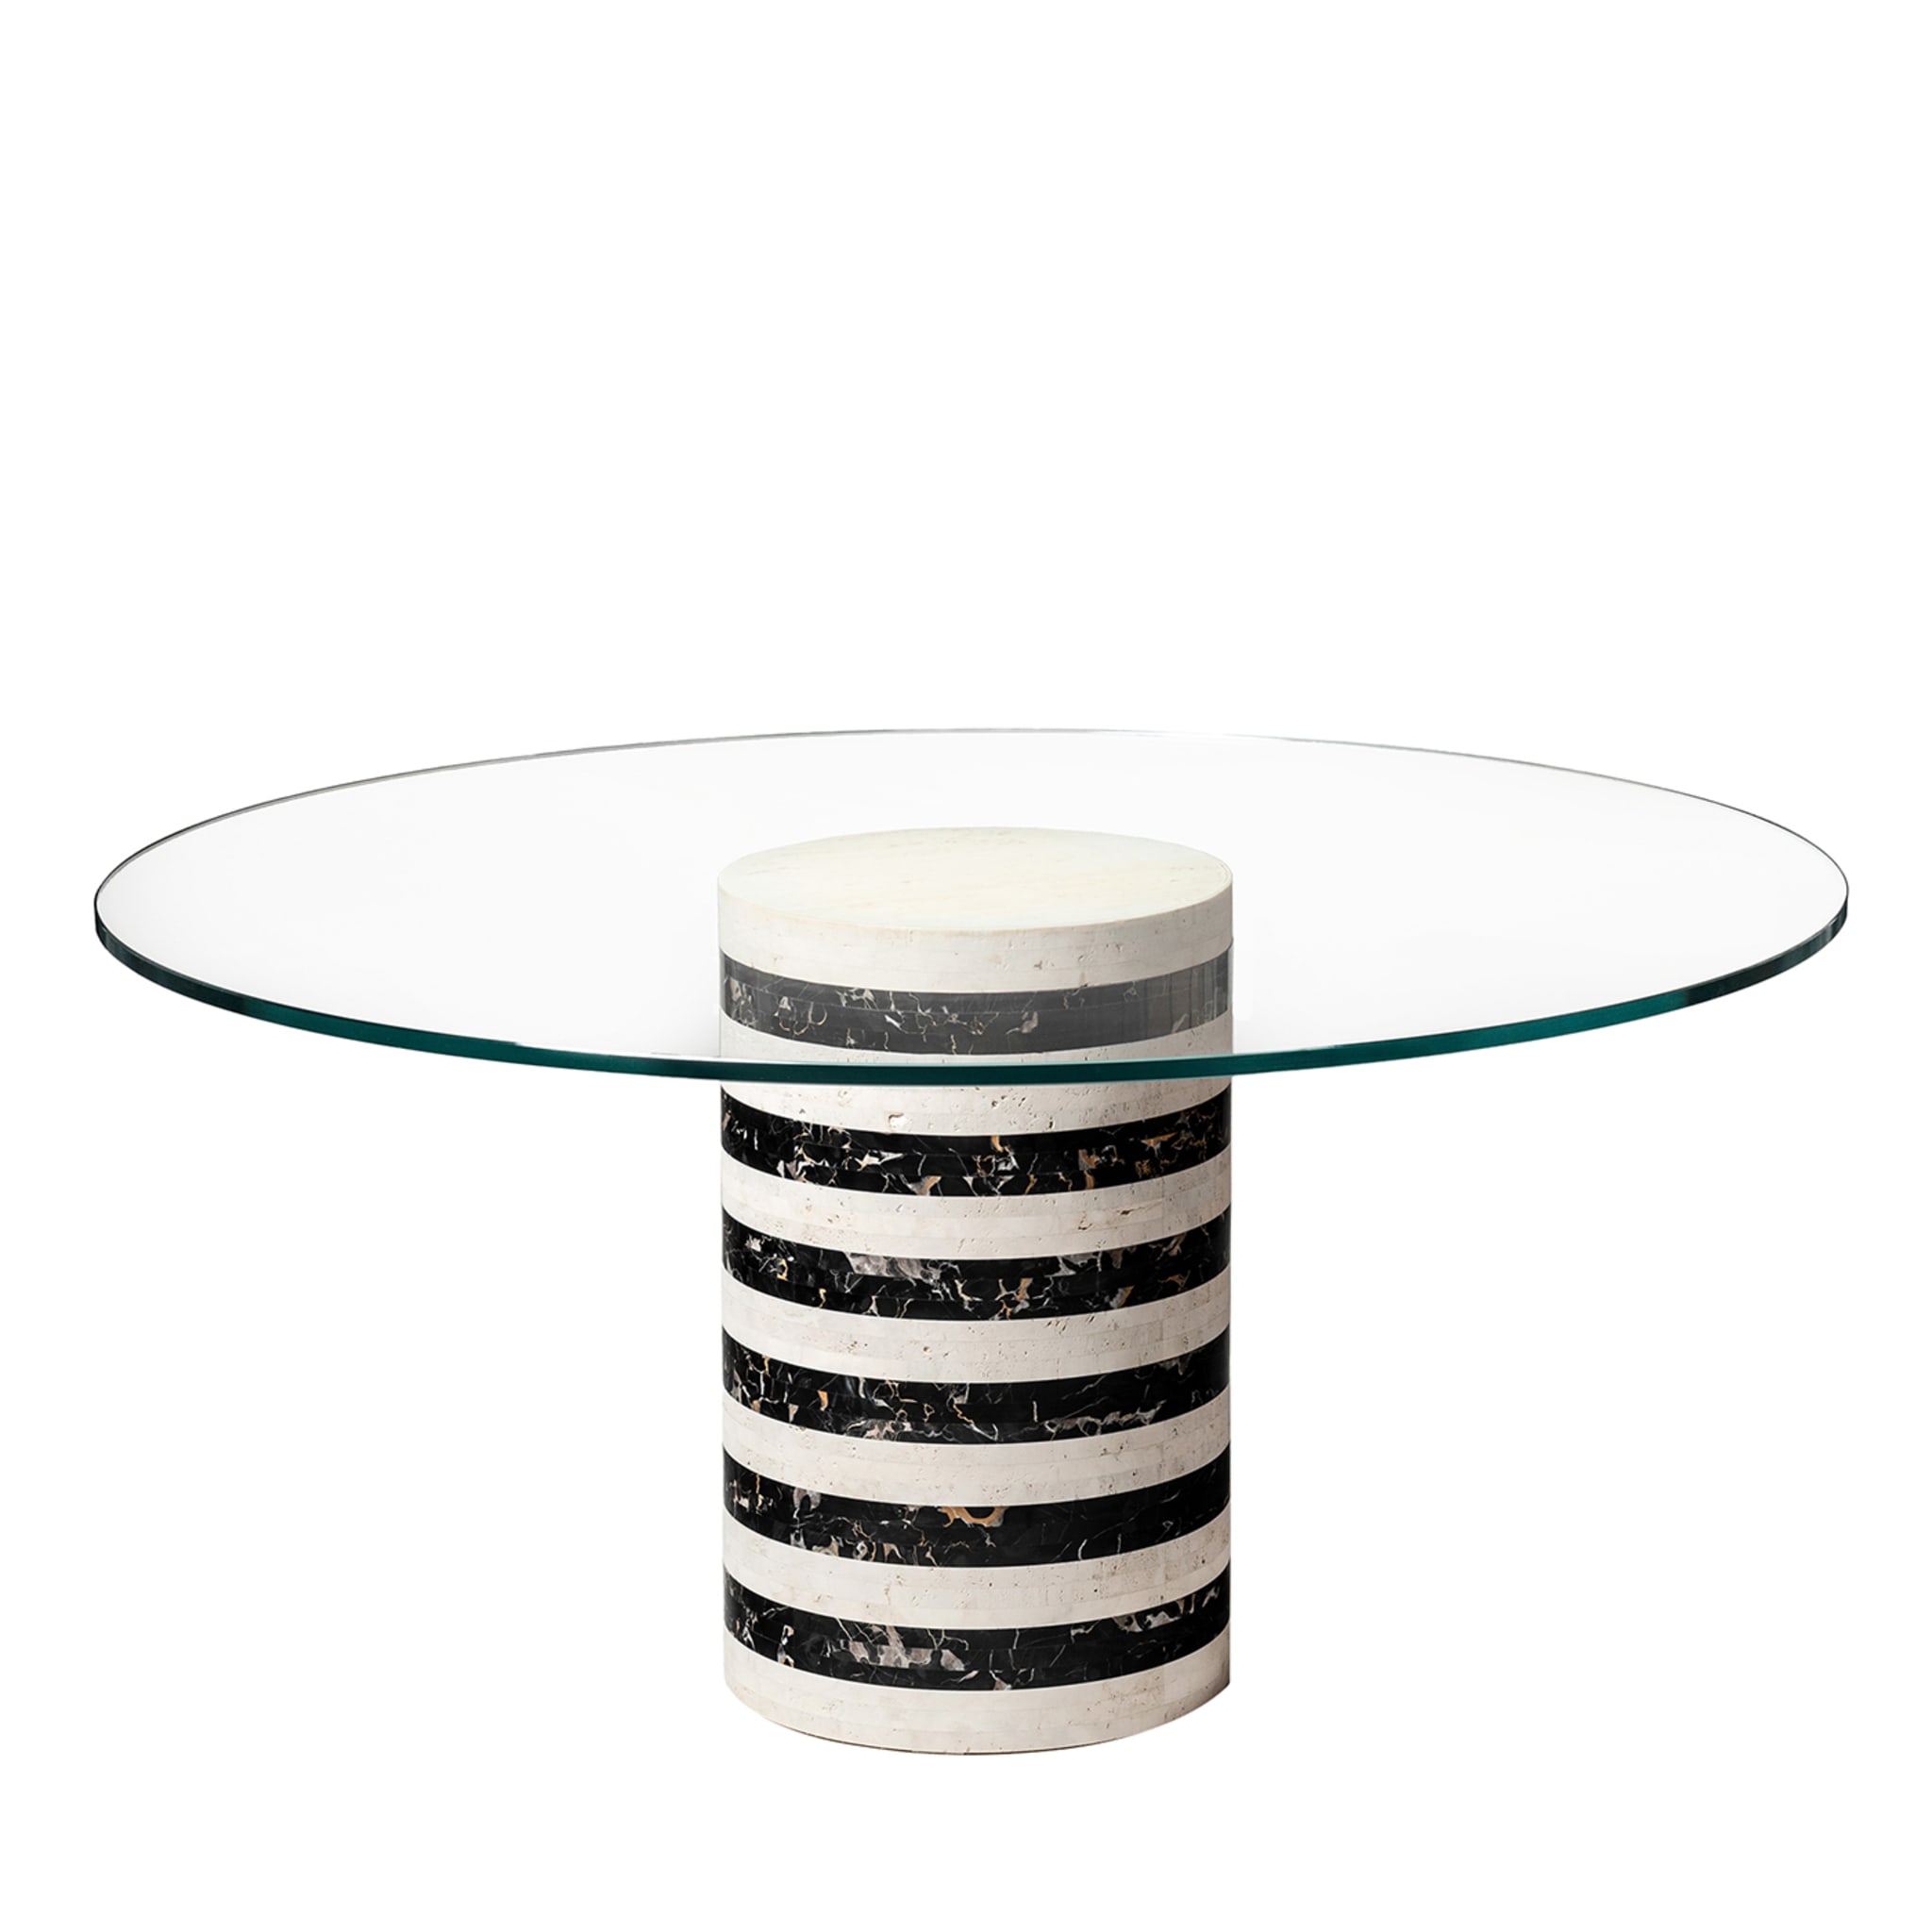 Architexture Living Table 02 by Patricia Urquiola - Main view